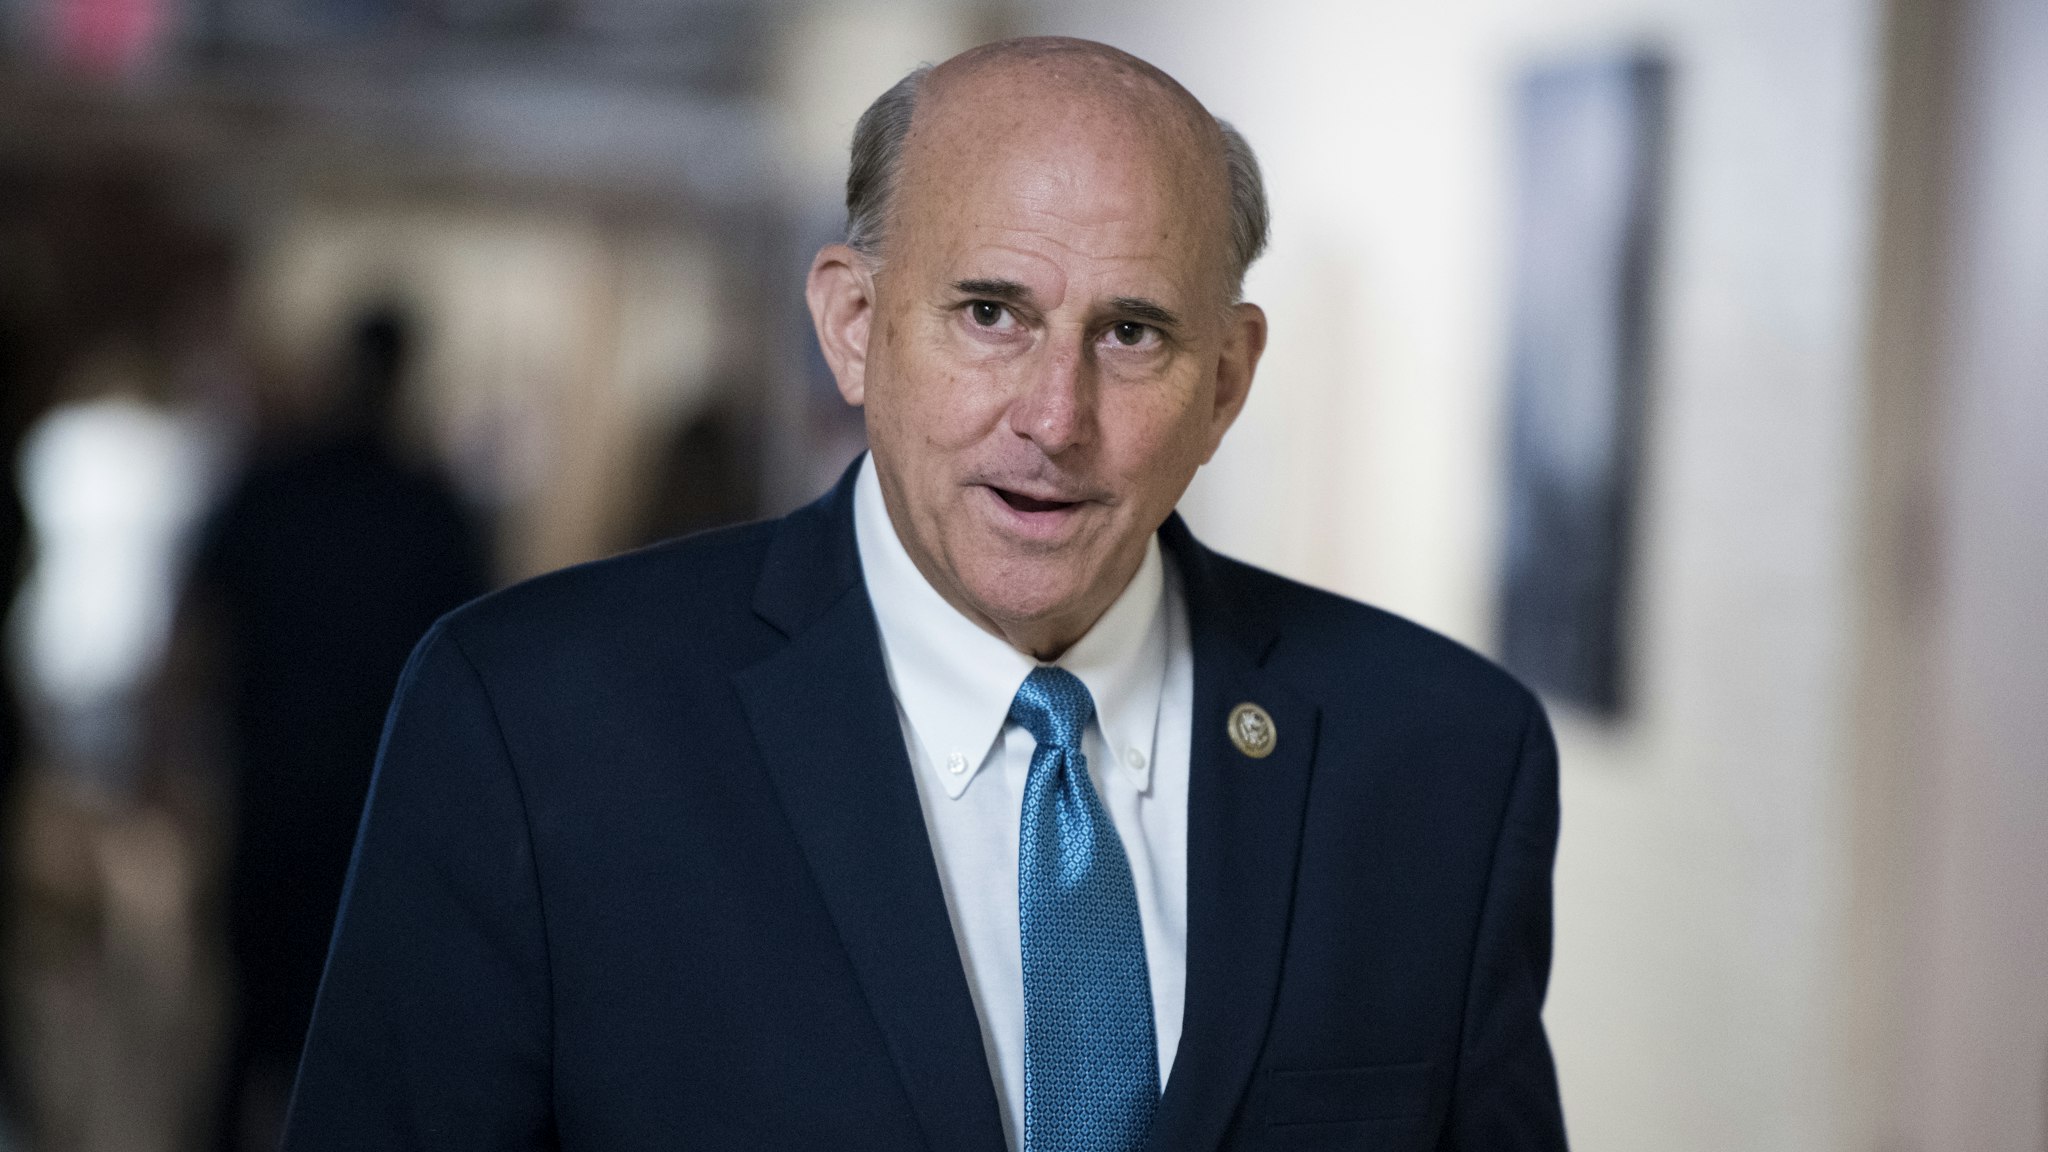 Rep. Louie Gohmert, R-Texas, leaves the House Republican Conference meeting in the Capitol on Wednesday, July 11, 2018.